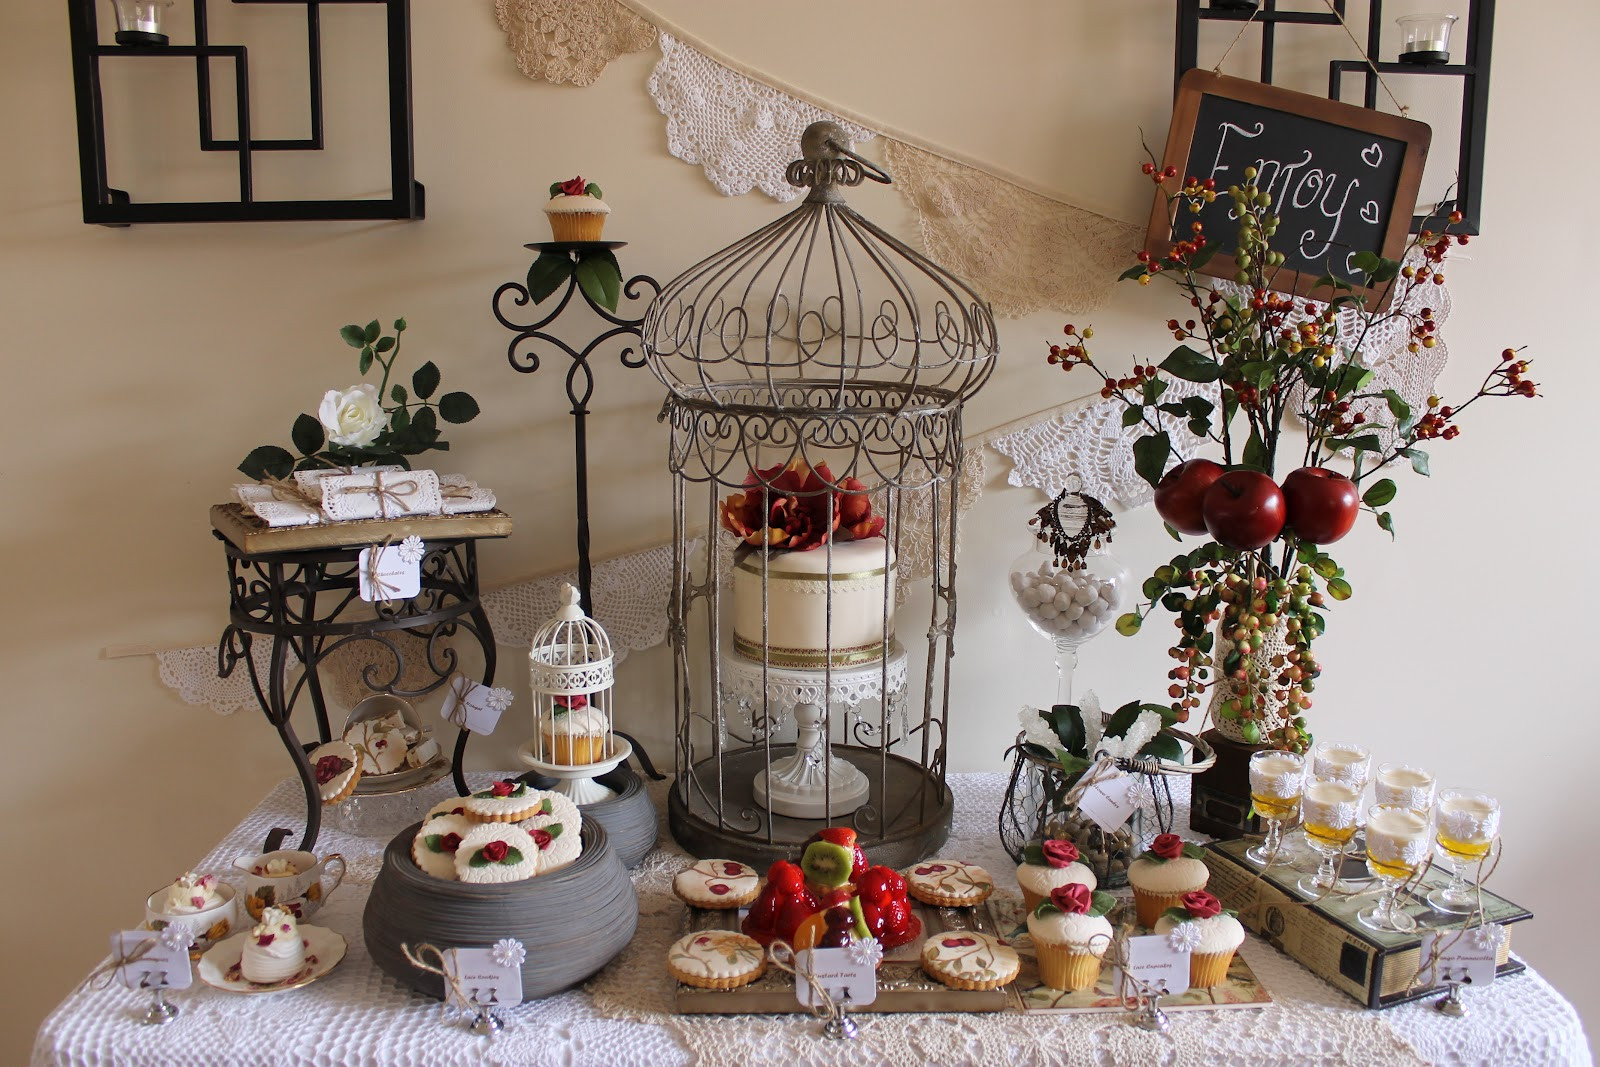 Vintage Birthday Decorations
 Events By Nat My Vintage Rose and Doily Inspired 32nd